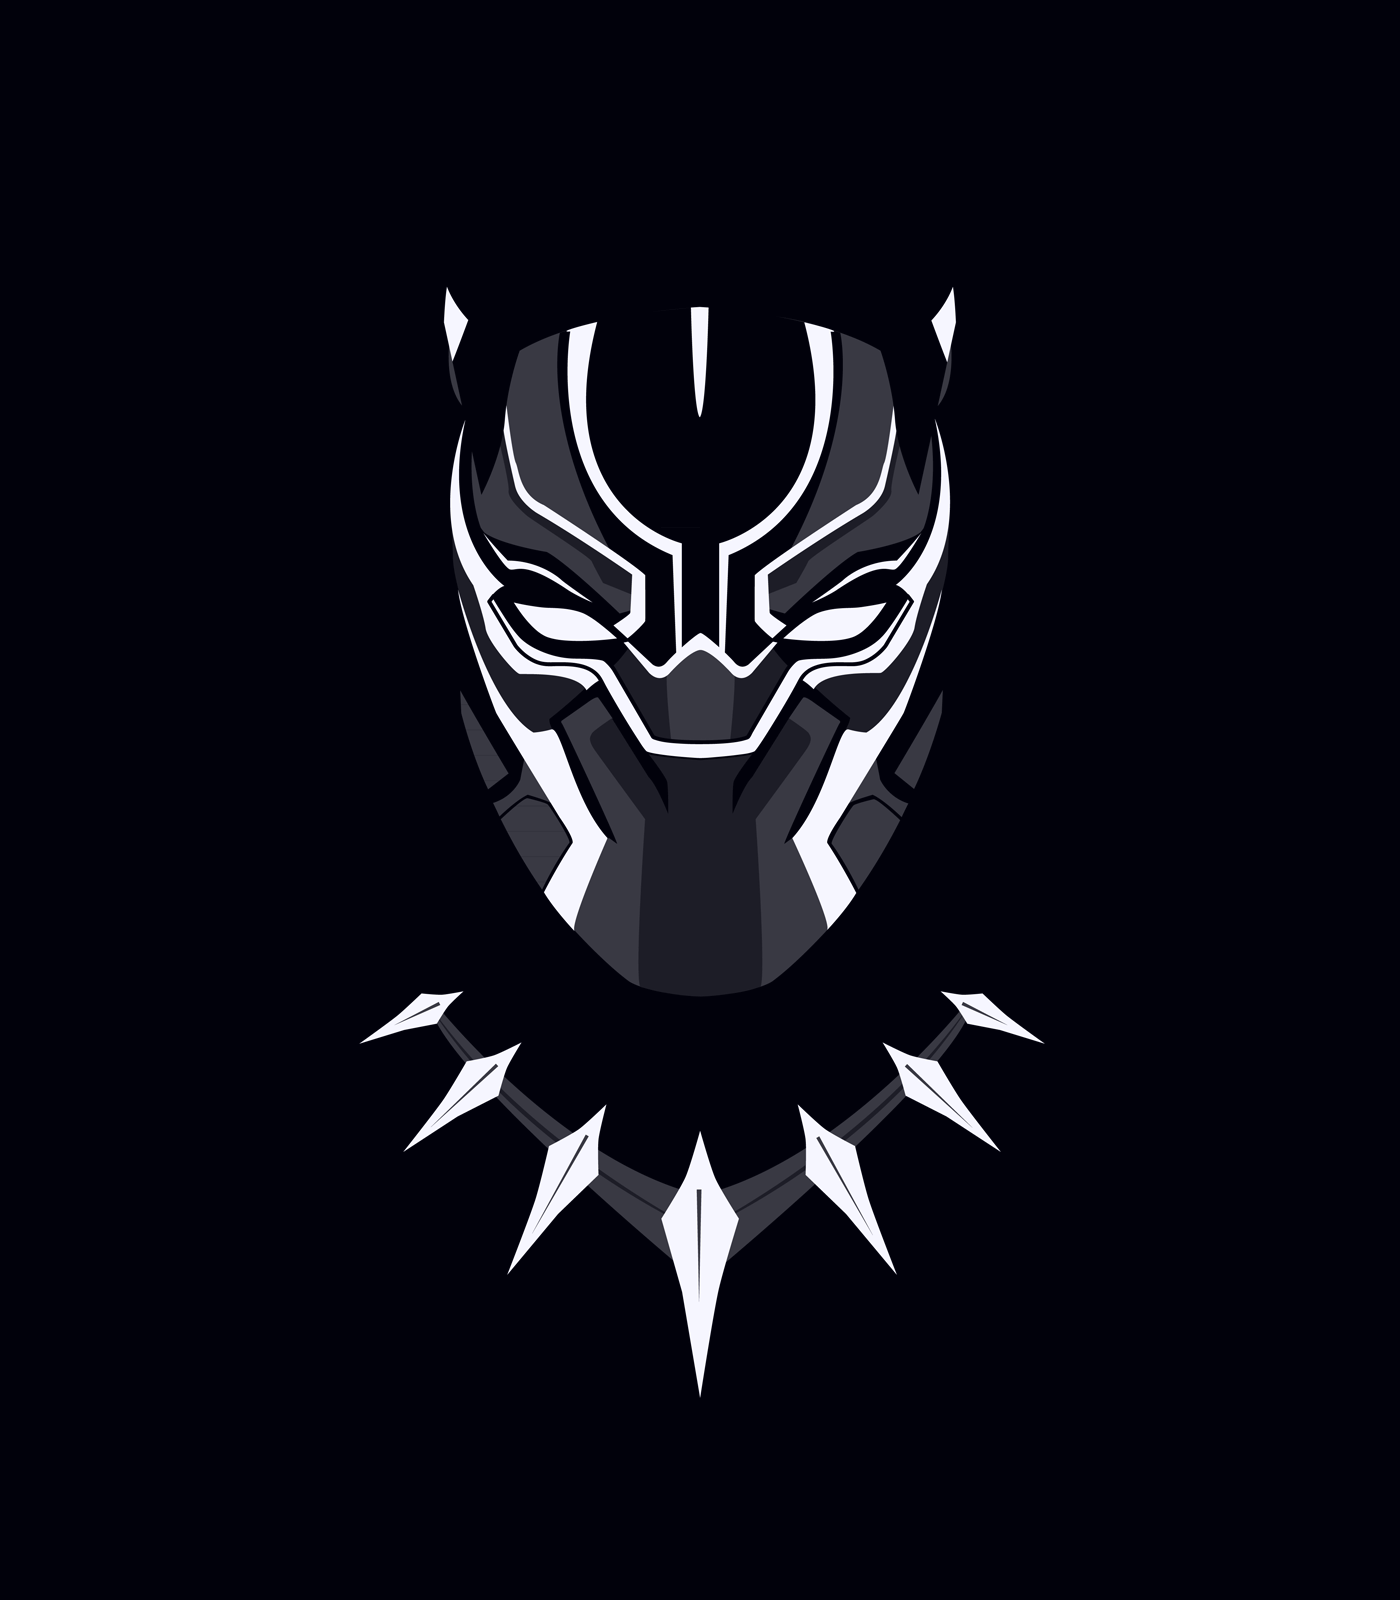 Black Panther Marvel Wallpaper 4k iPhone, Android and Desktop!